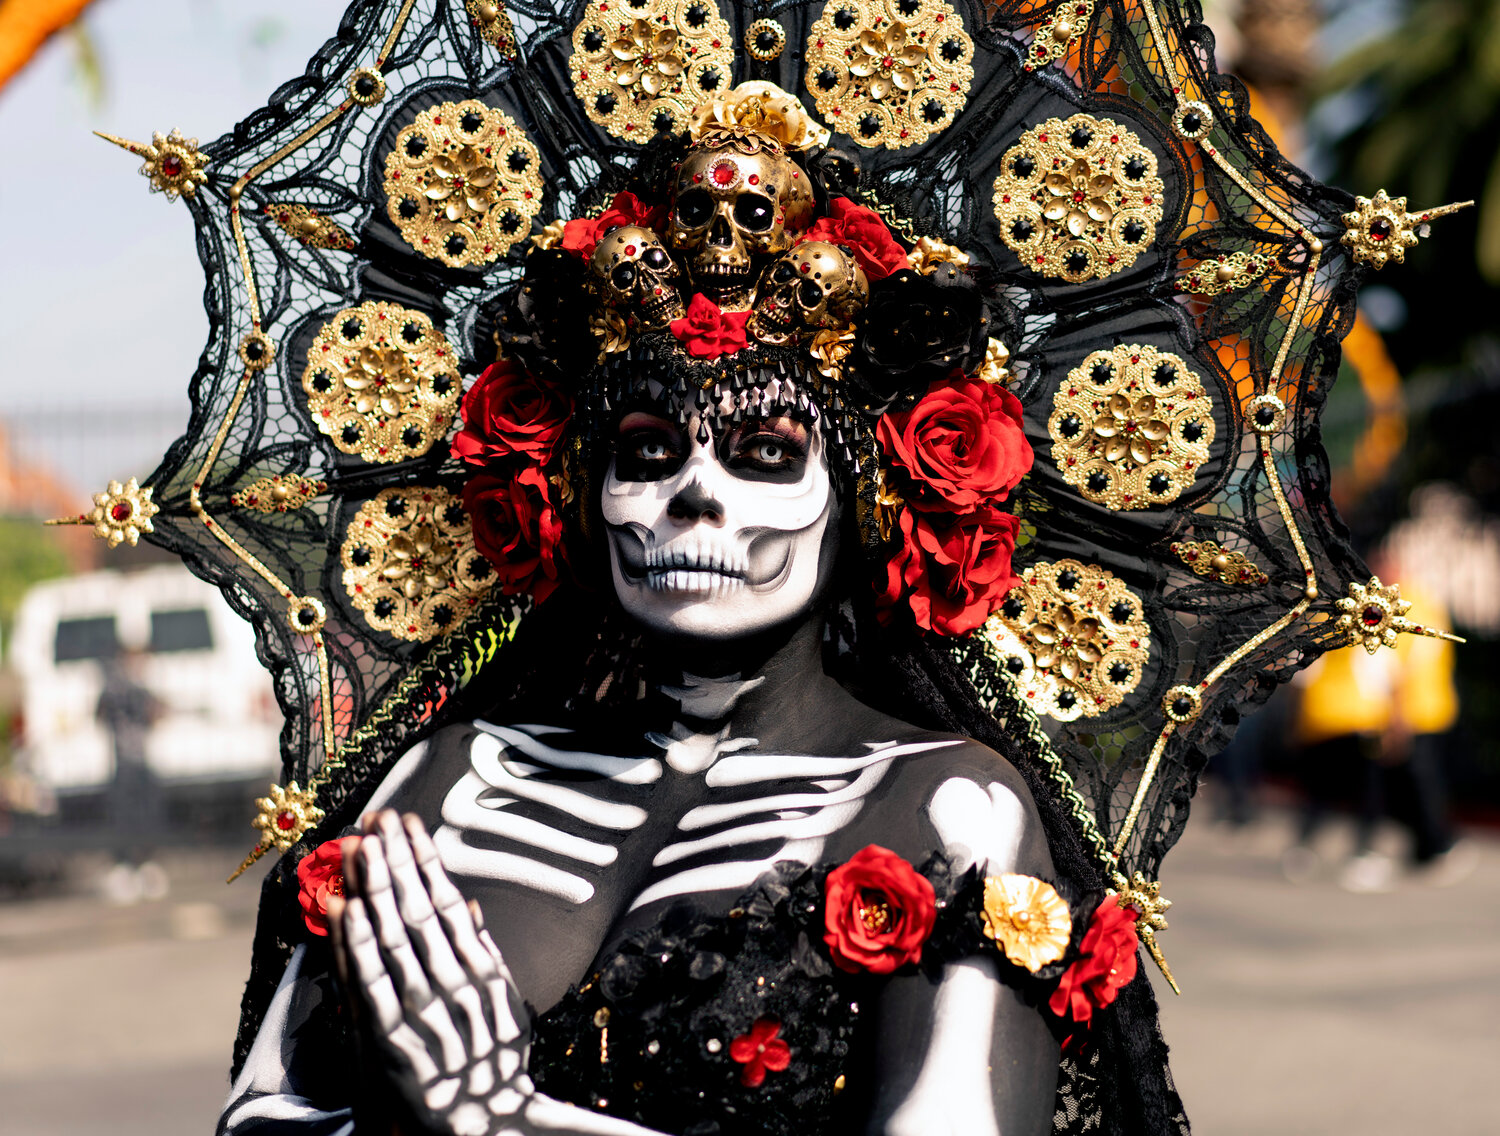 Dressed in traditional make-up and costume a woman participates in the celebration for the Day of the Dead, or Día de los Muertos, in this AP file photo.